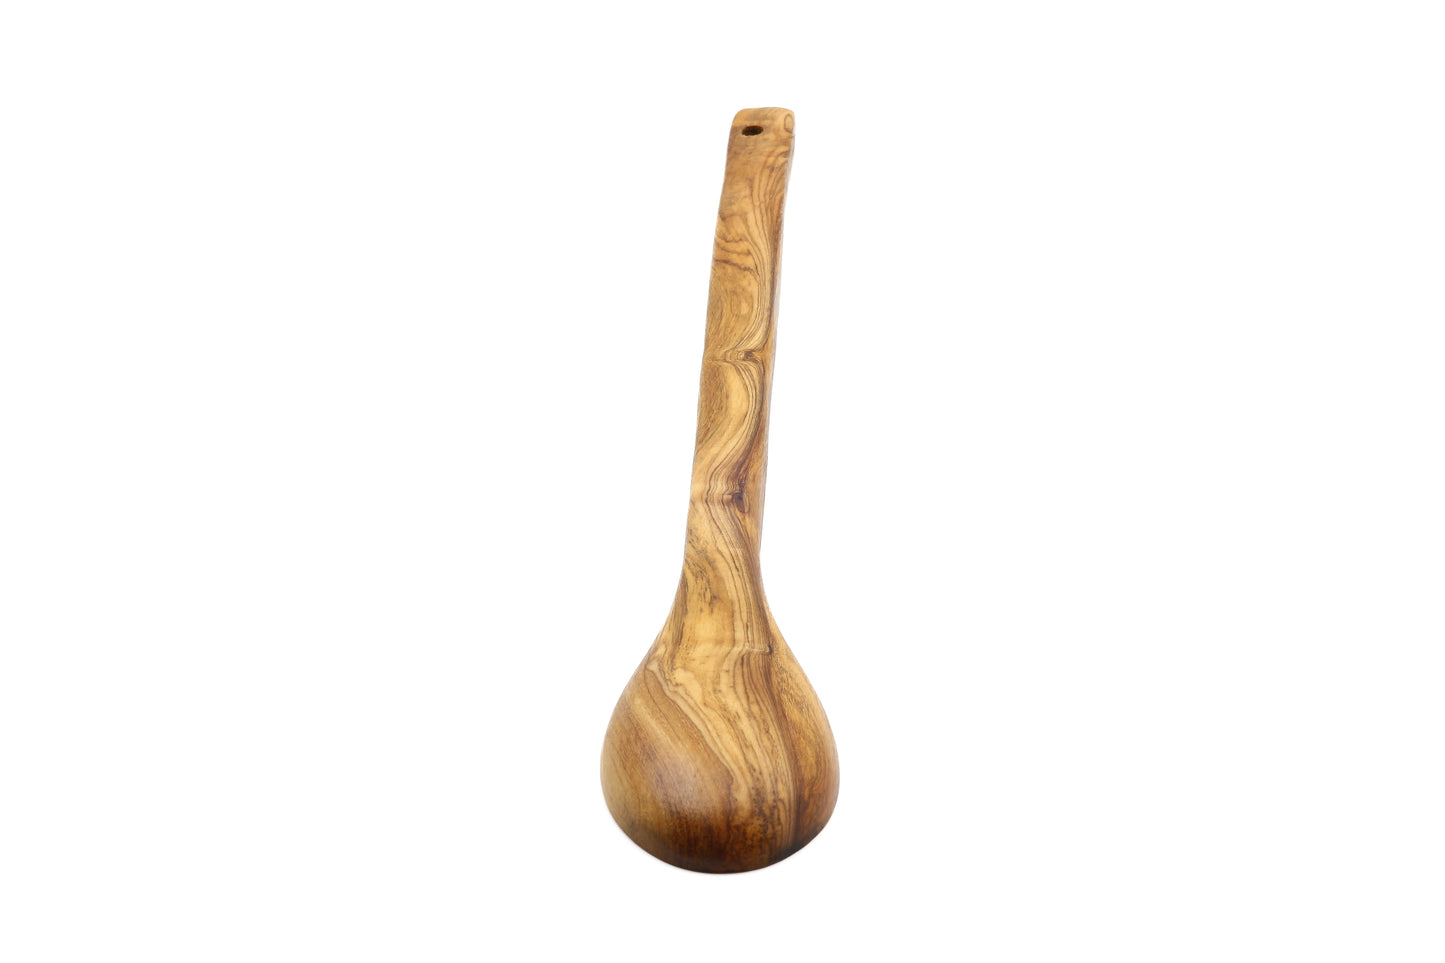 A stylish and functional olive wood spoon for all your cooking tasks